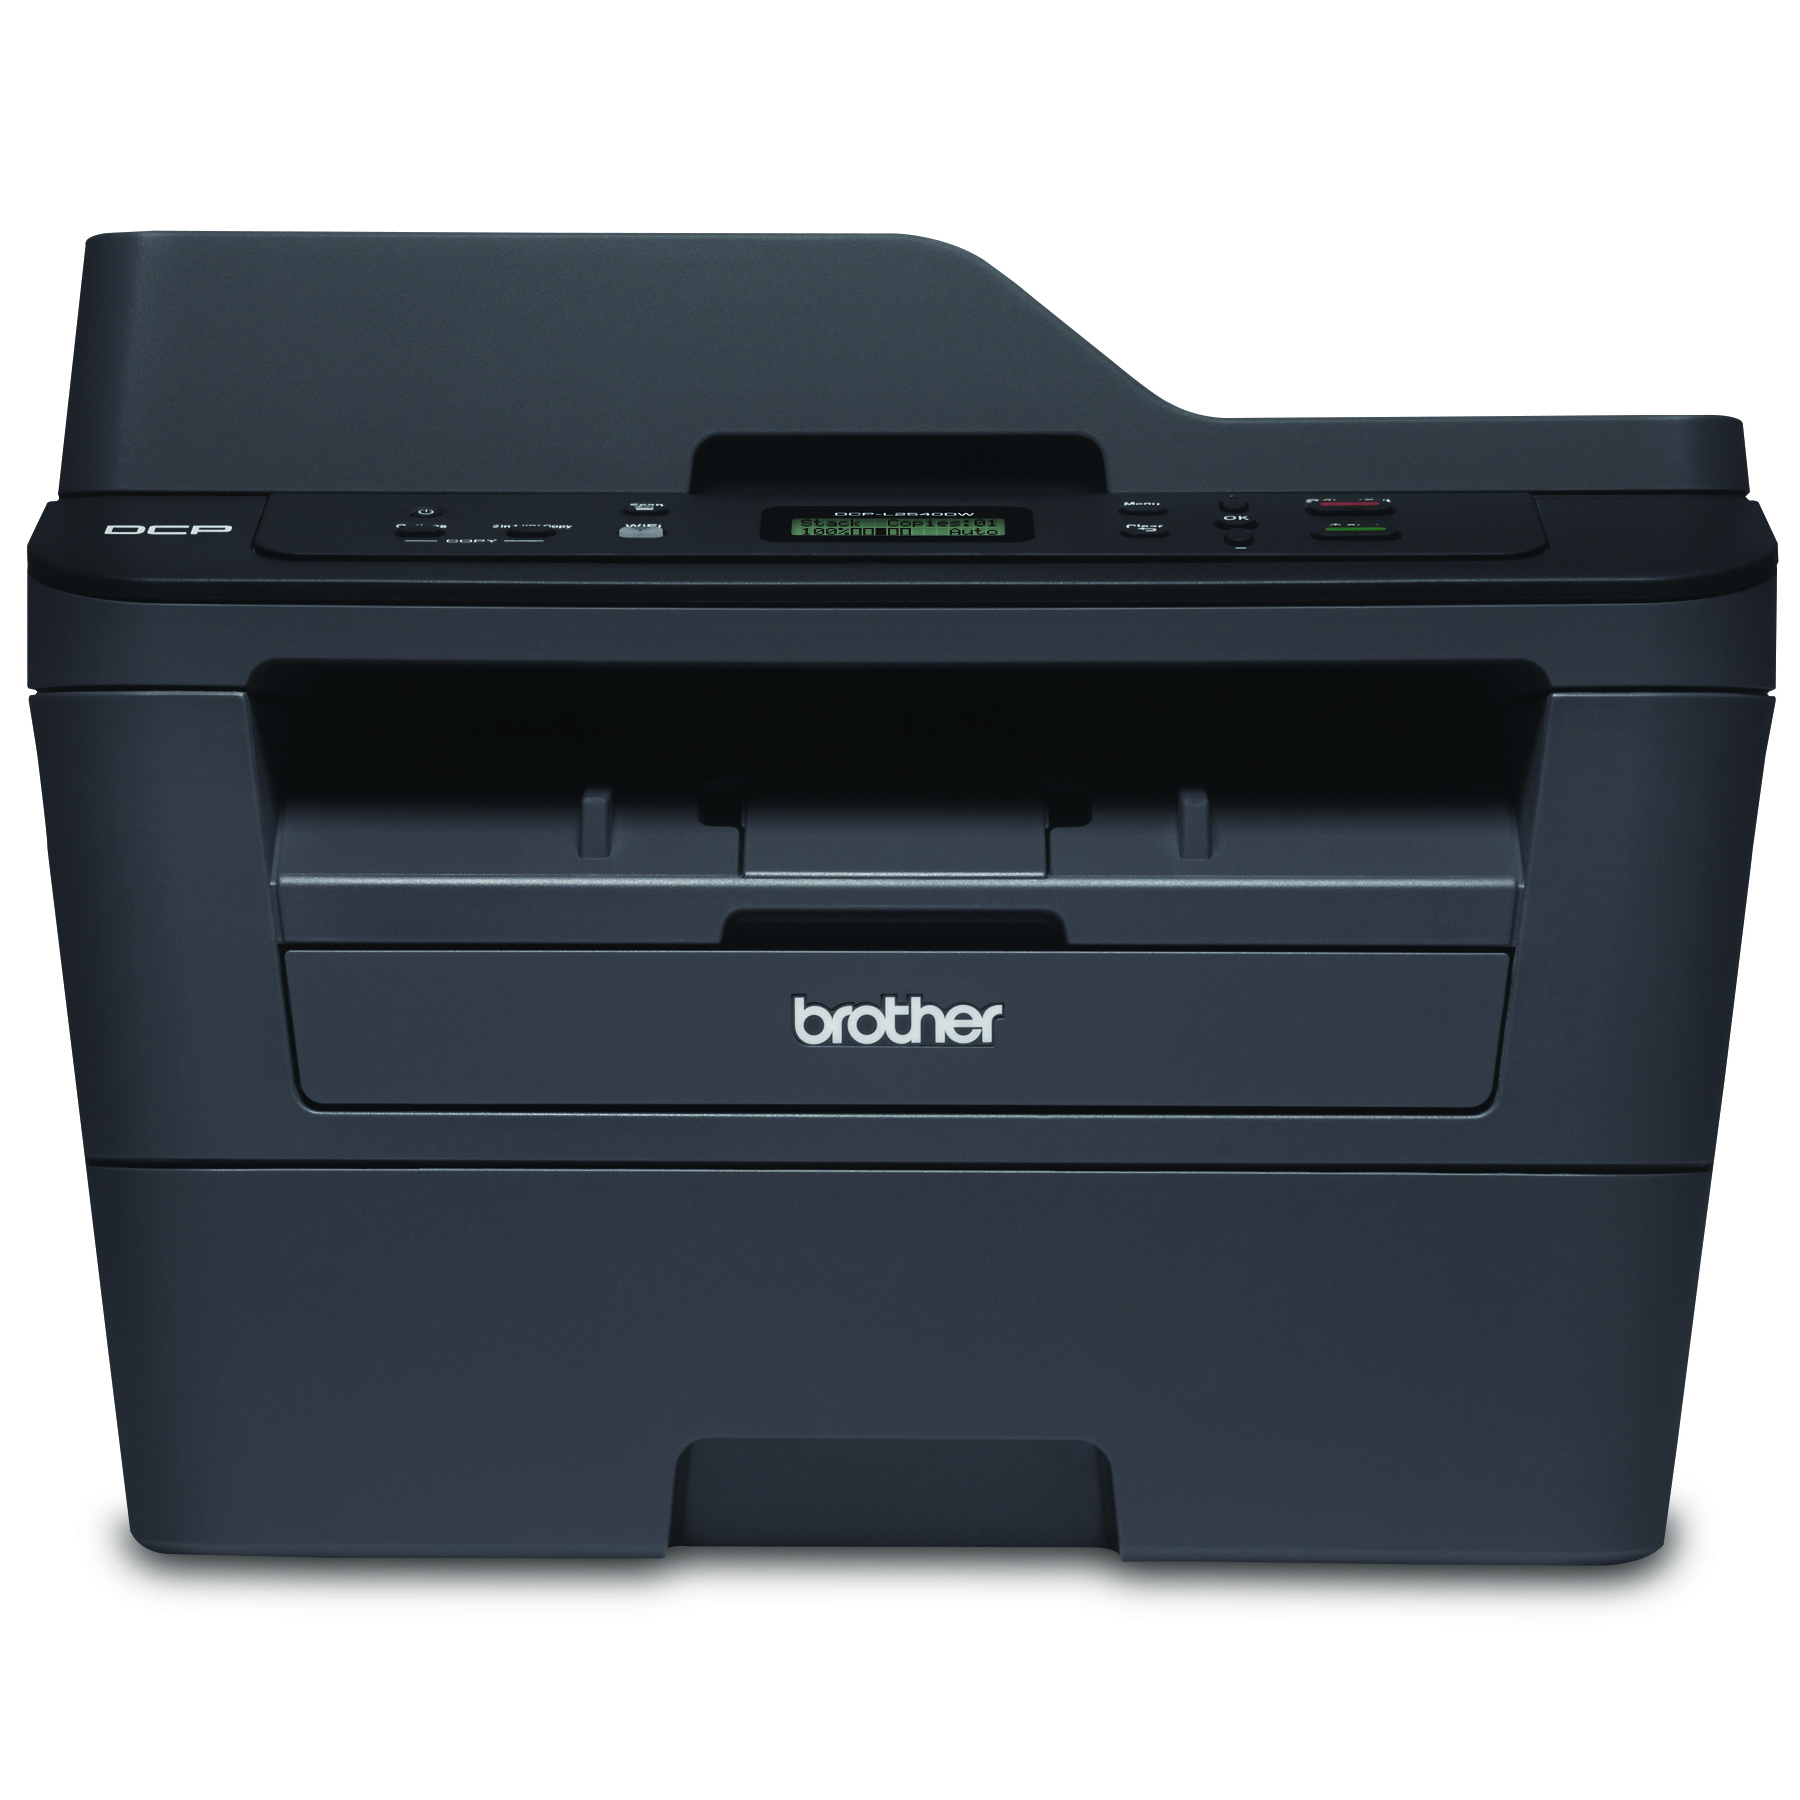 Brother DCP-L2540DW All-in-One Monochrome Laser Printer